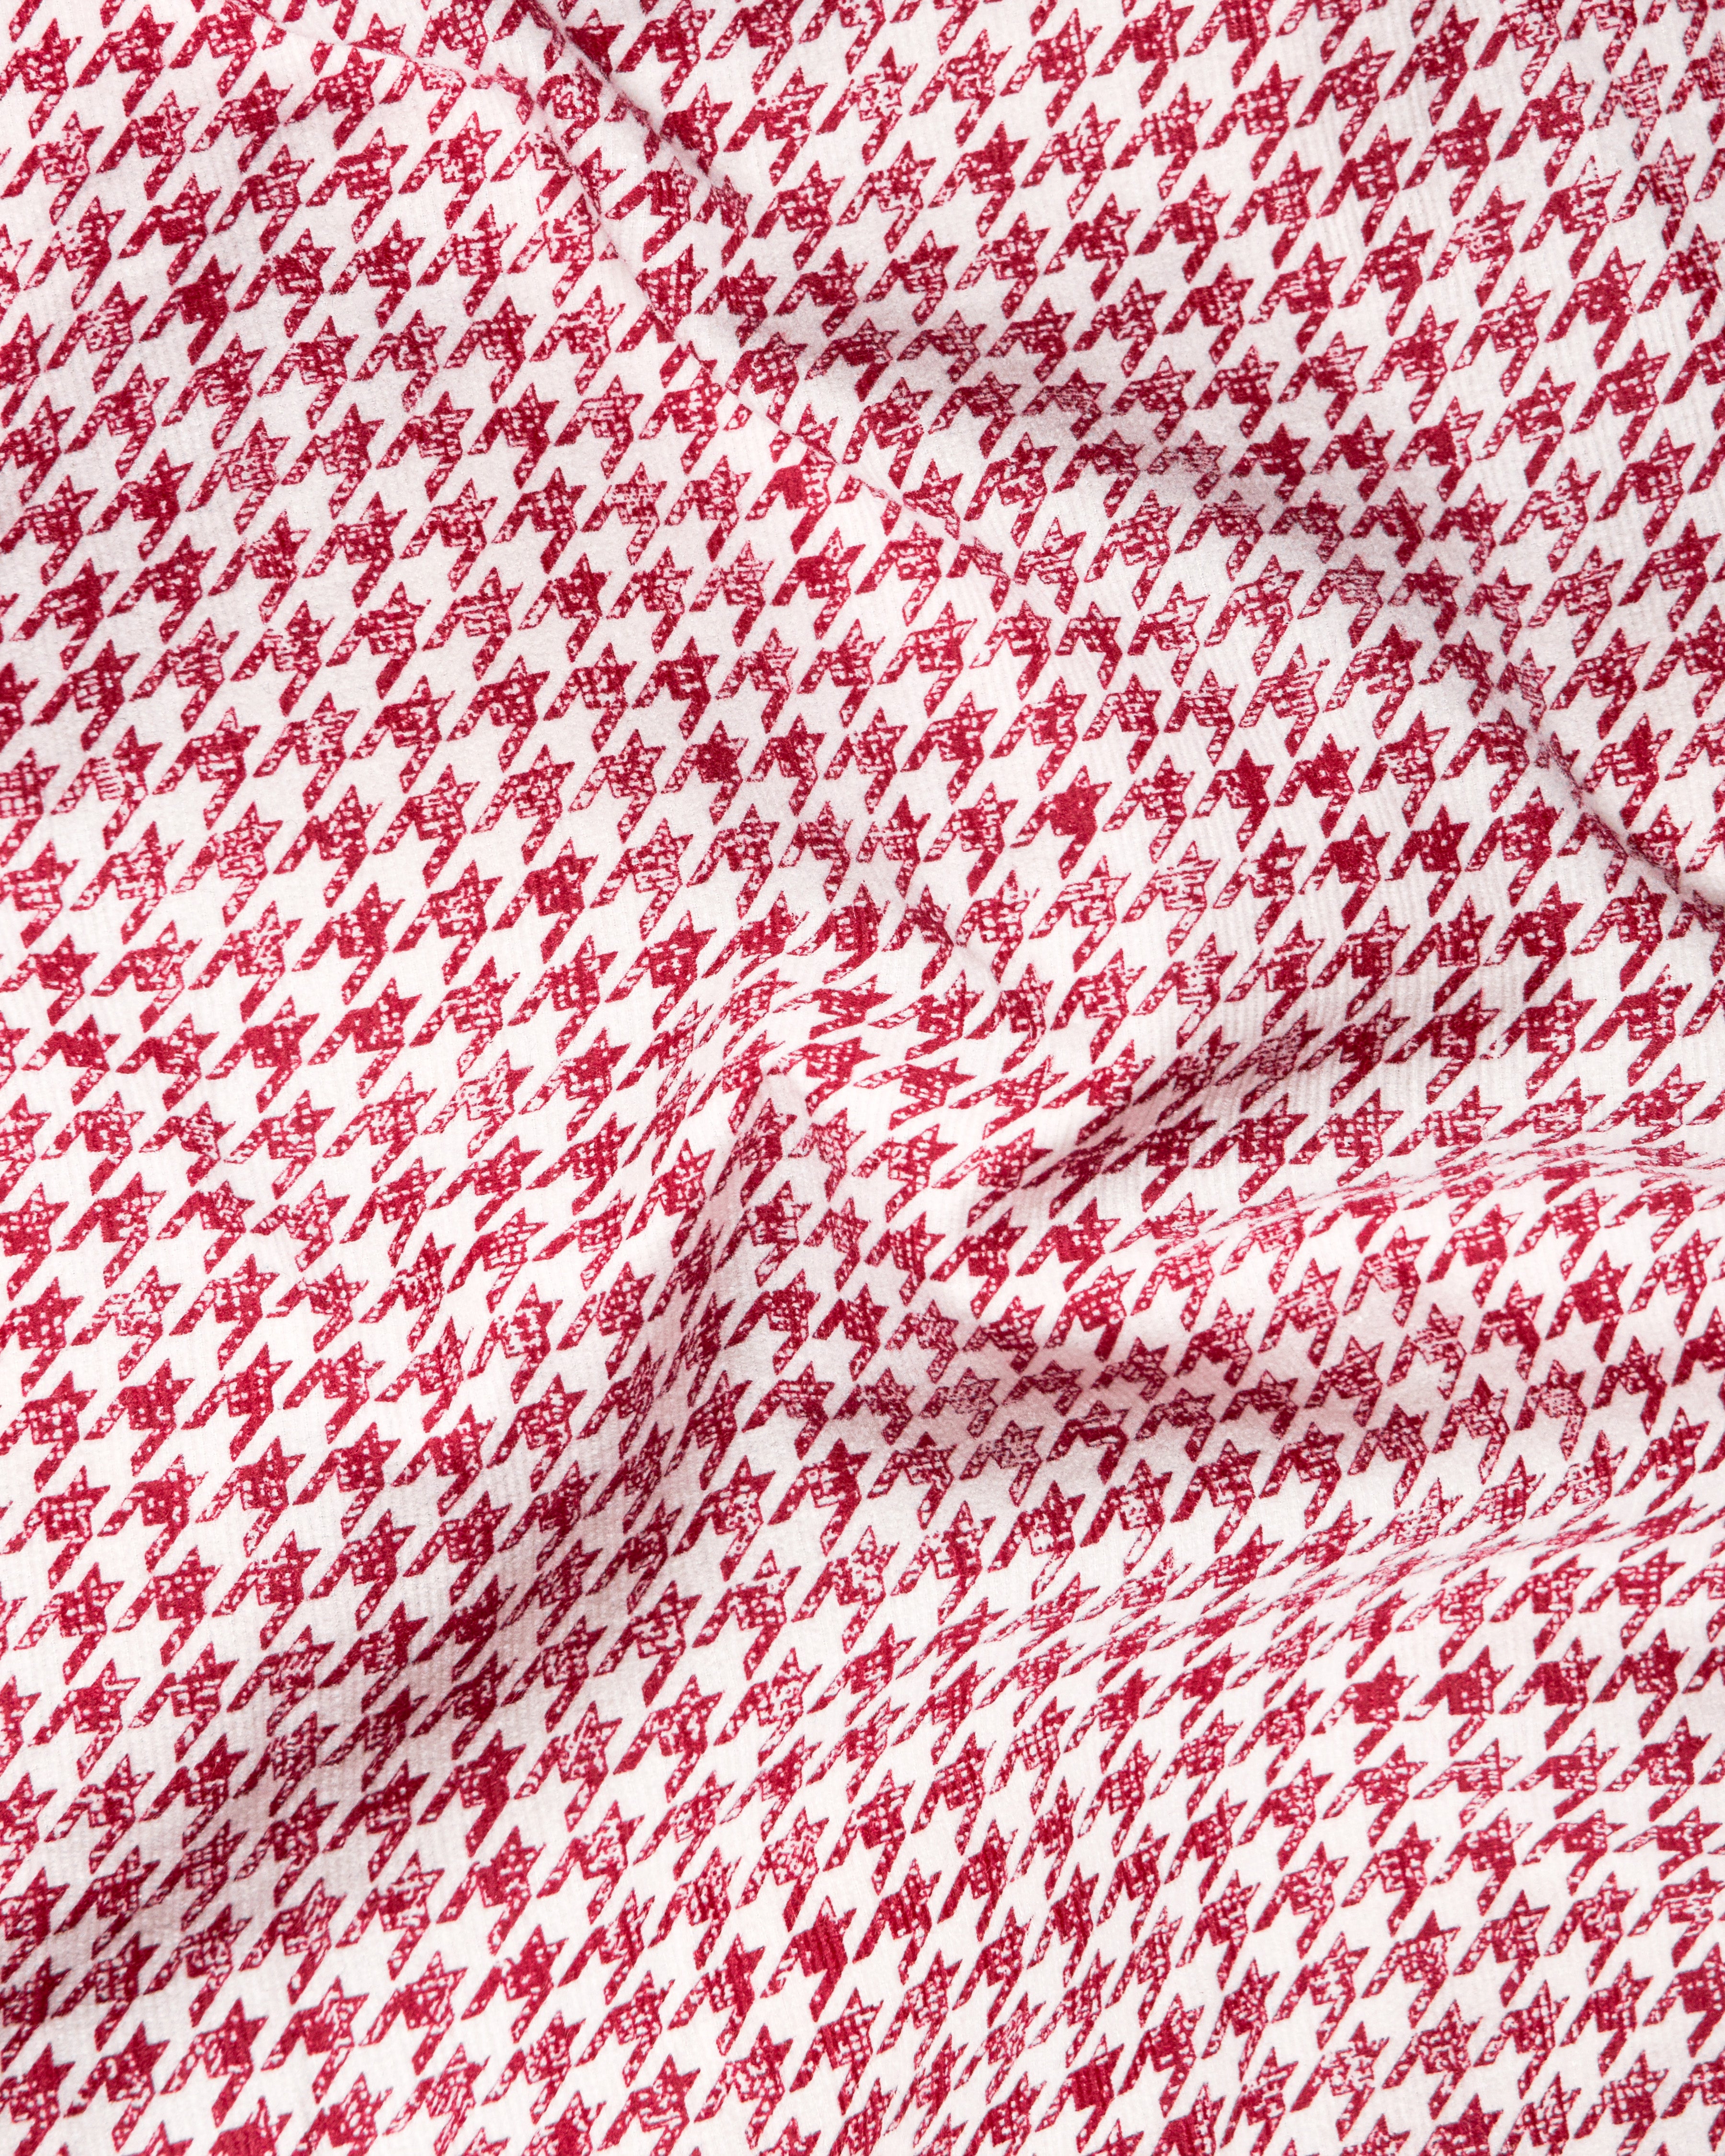 Shiraz Red and White Houndstooth Corduroy Overshirt/Shacket 9916-OS-P301-38, 9916-OS-P301-H-38, 9916-OS-P301-39, 9916-OS-P301-H-39, 9916-OS-P301-40, 9916-OS-P301-H-40, 9916-OS-P301-42, 9916-OS-P301-H-42, 9916-OS-P301-44, 9916-OS-P301-H-44, 9916-OS-P301-46, 9916-OS-P301-H-46, 9916-OS-P301-48, 9916-OS-P301-H-48, 9916-OS-P301-50, 9916-OS-P301-H-50, 9916-OS-P301-52, 9916-OS-P301-H-52